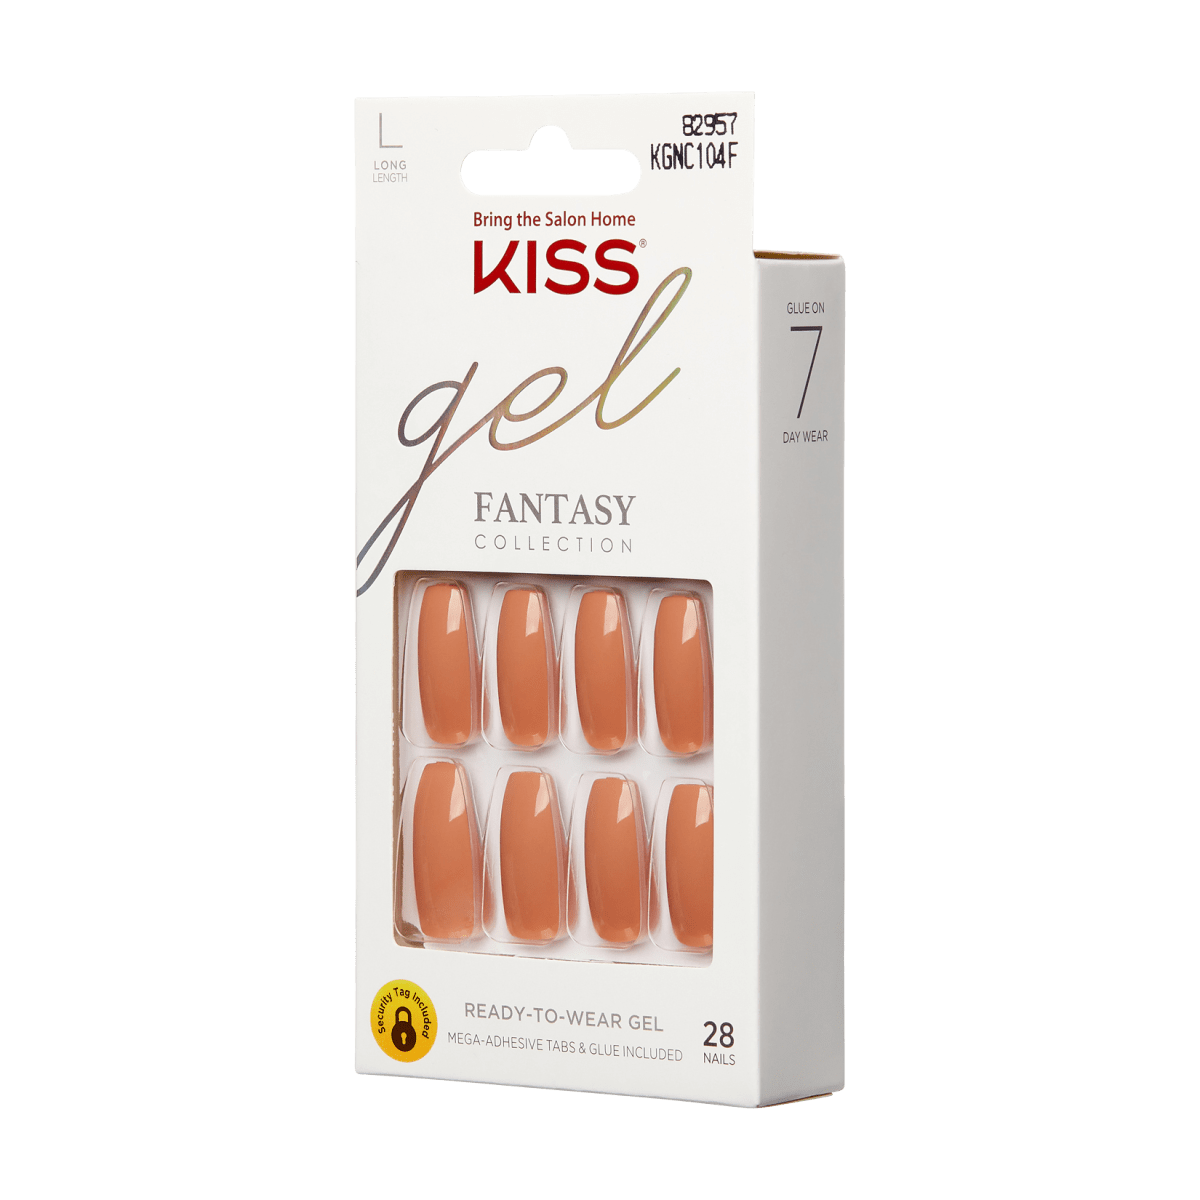 KISS Gel Fantasy Ready-to-Wear Gel Nails - Here with me